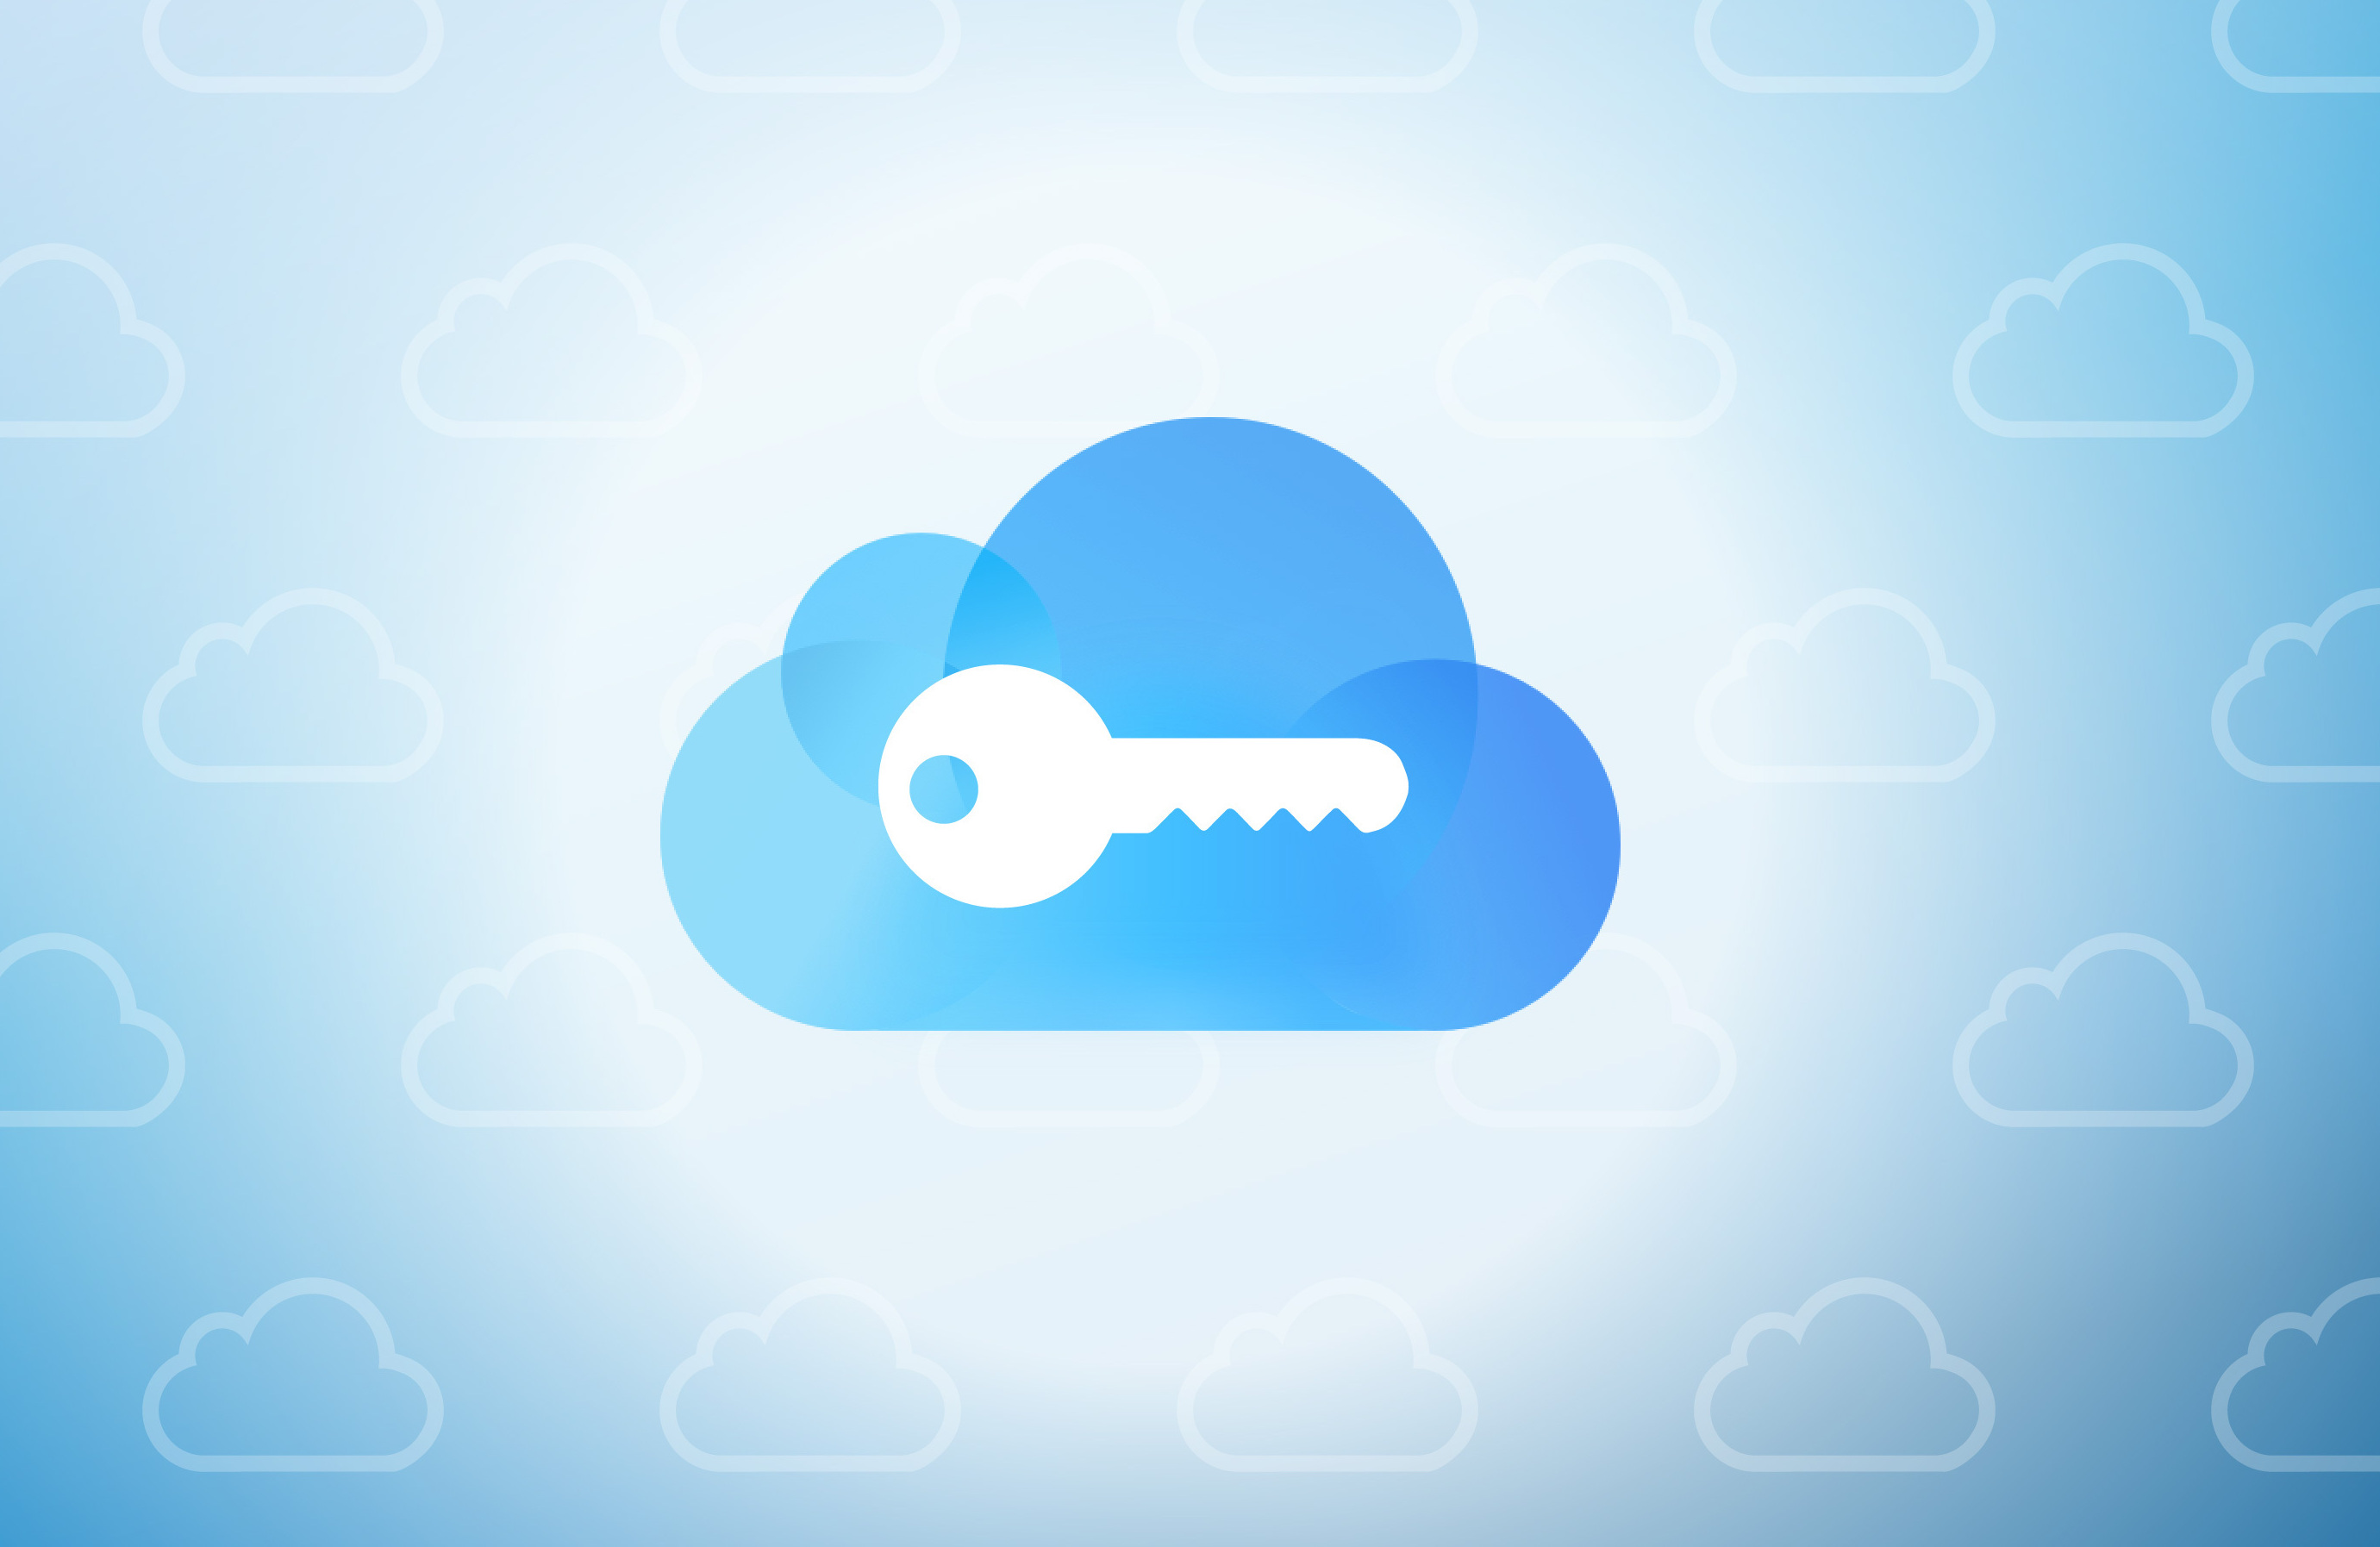 Illustration of the key over the cloud icon